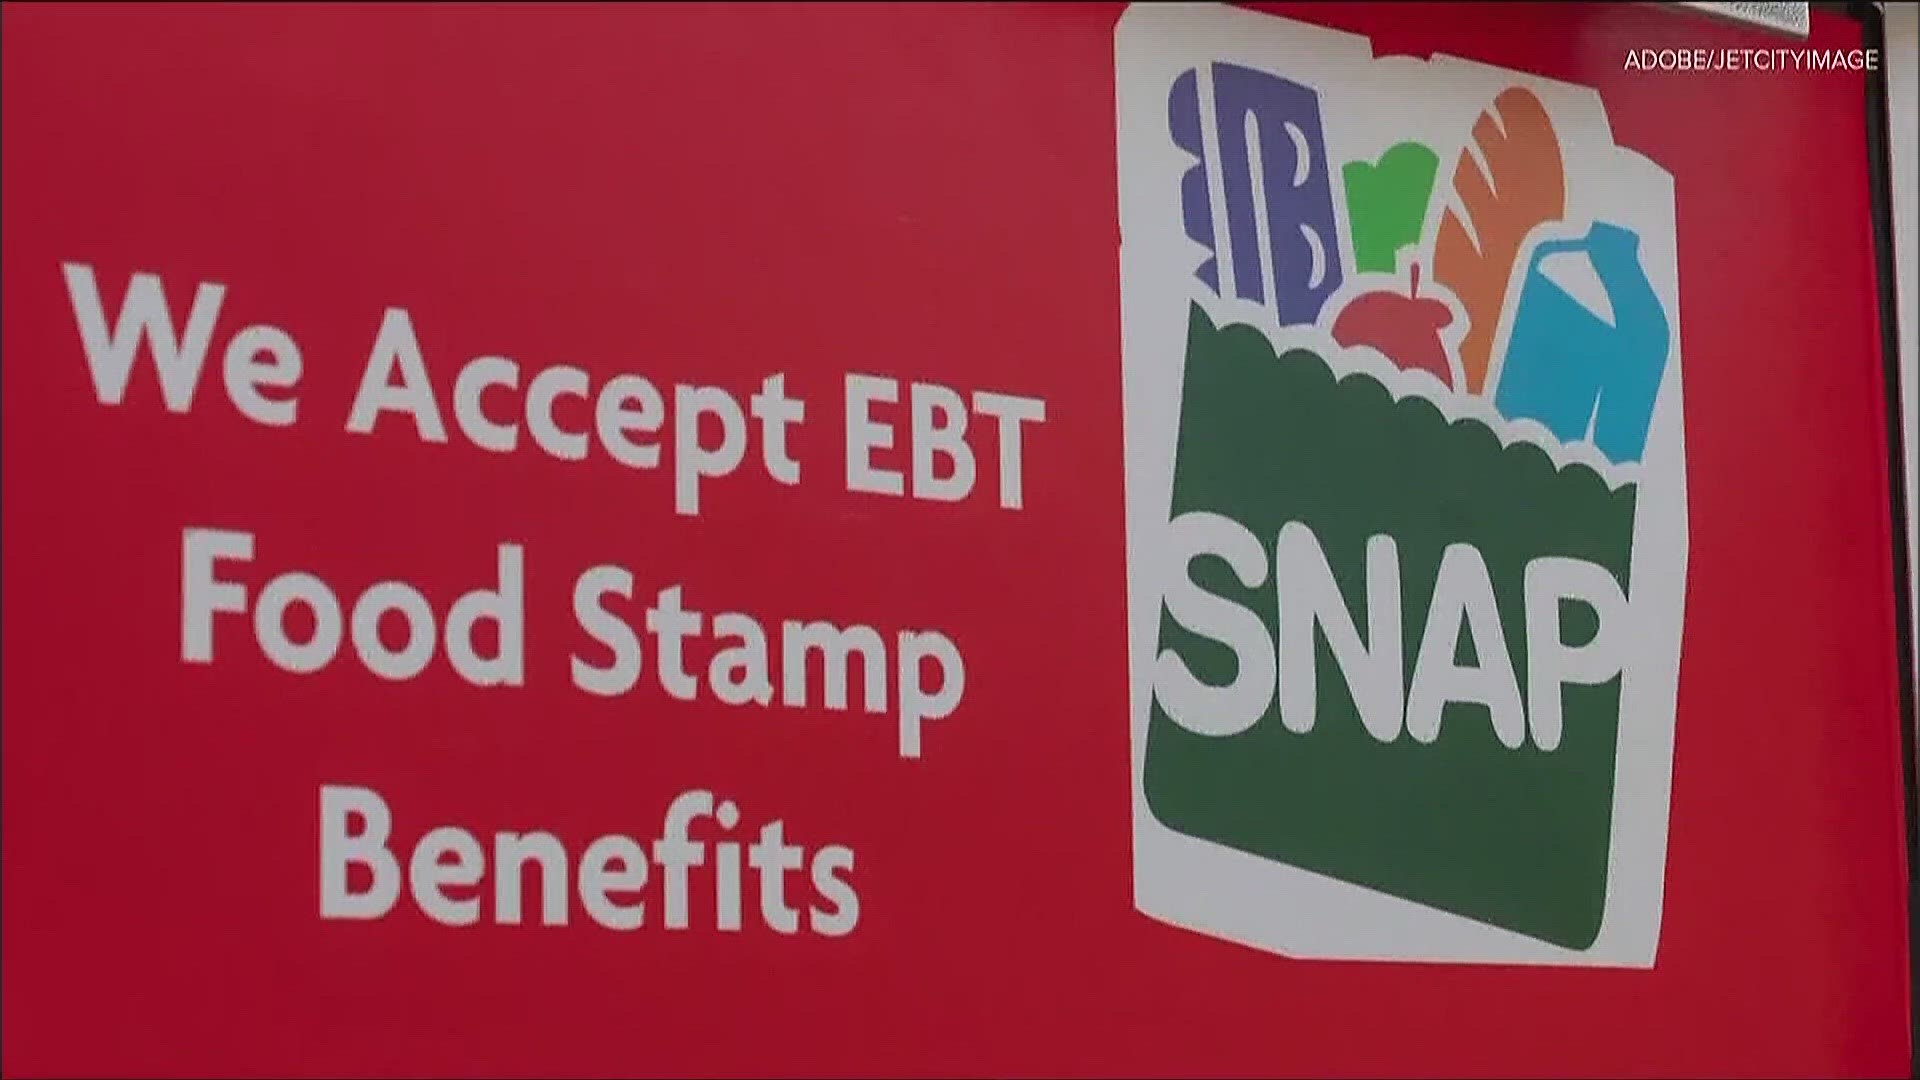 11Alive reached out to advocates for community resources and support as families struggle to get answers about their SNAP benefits